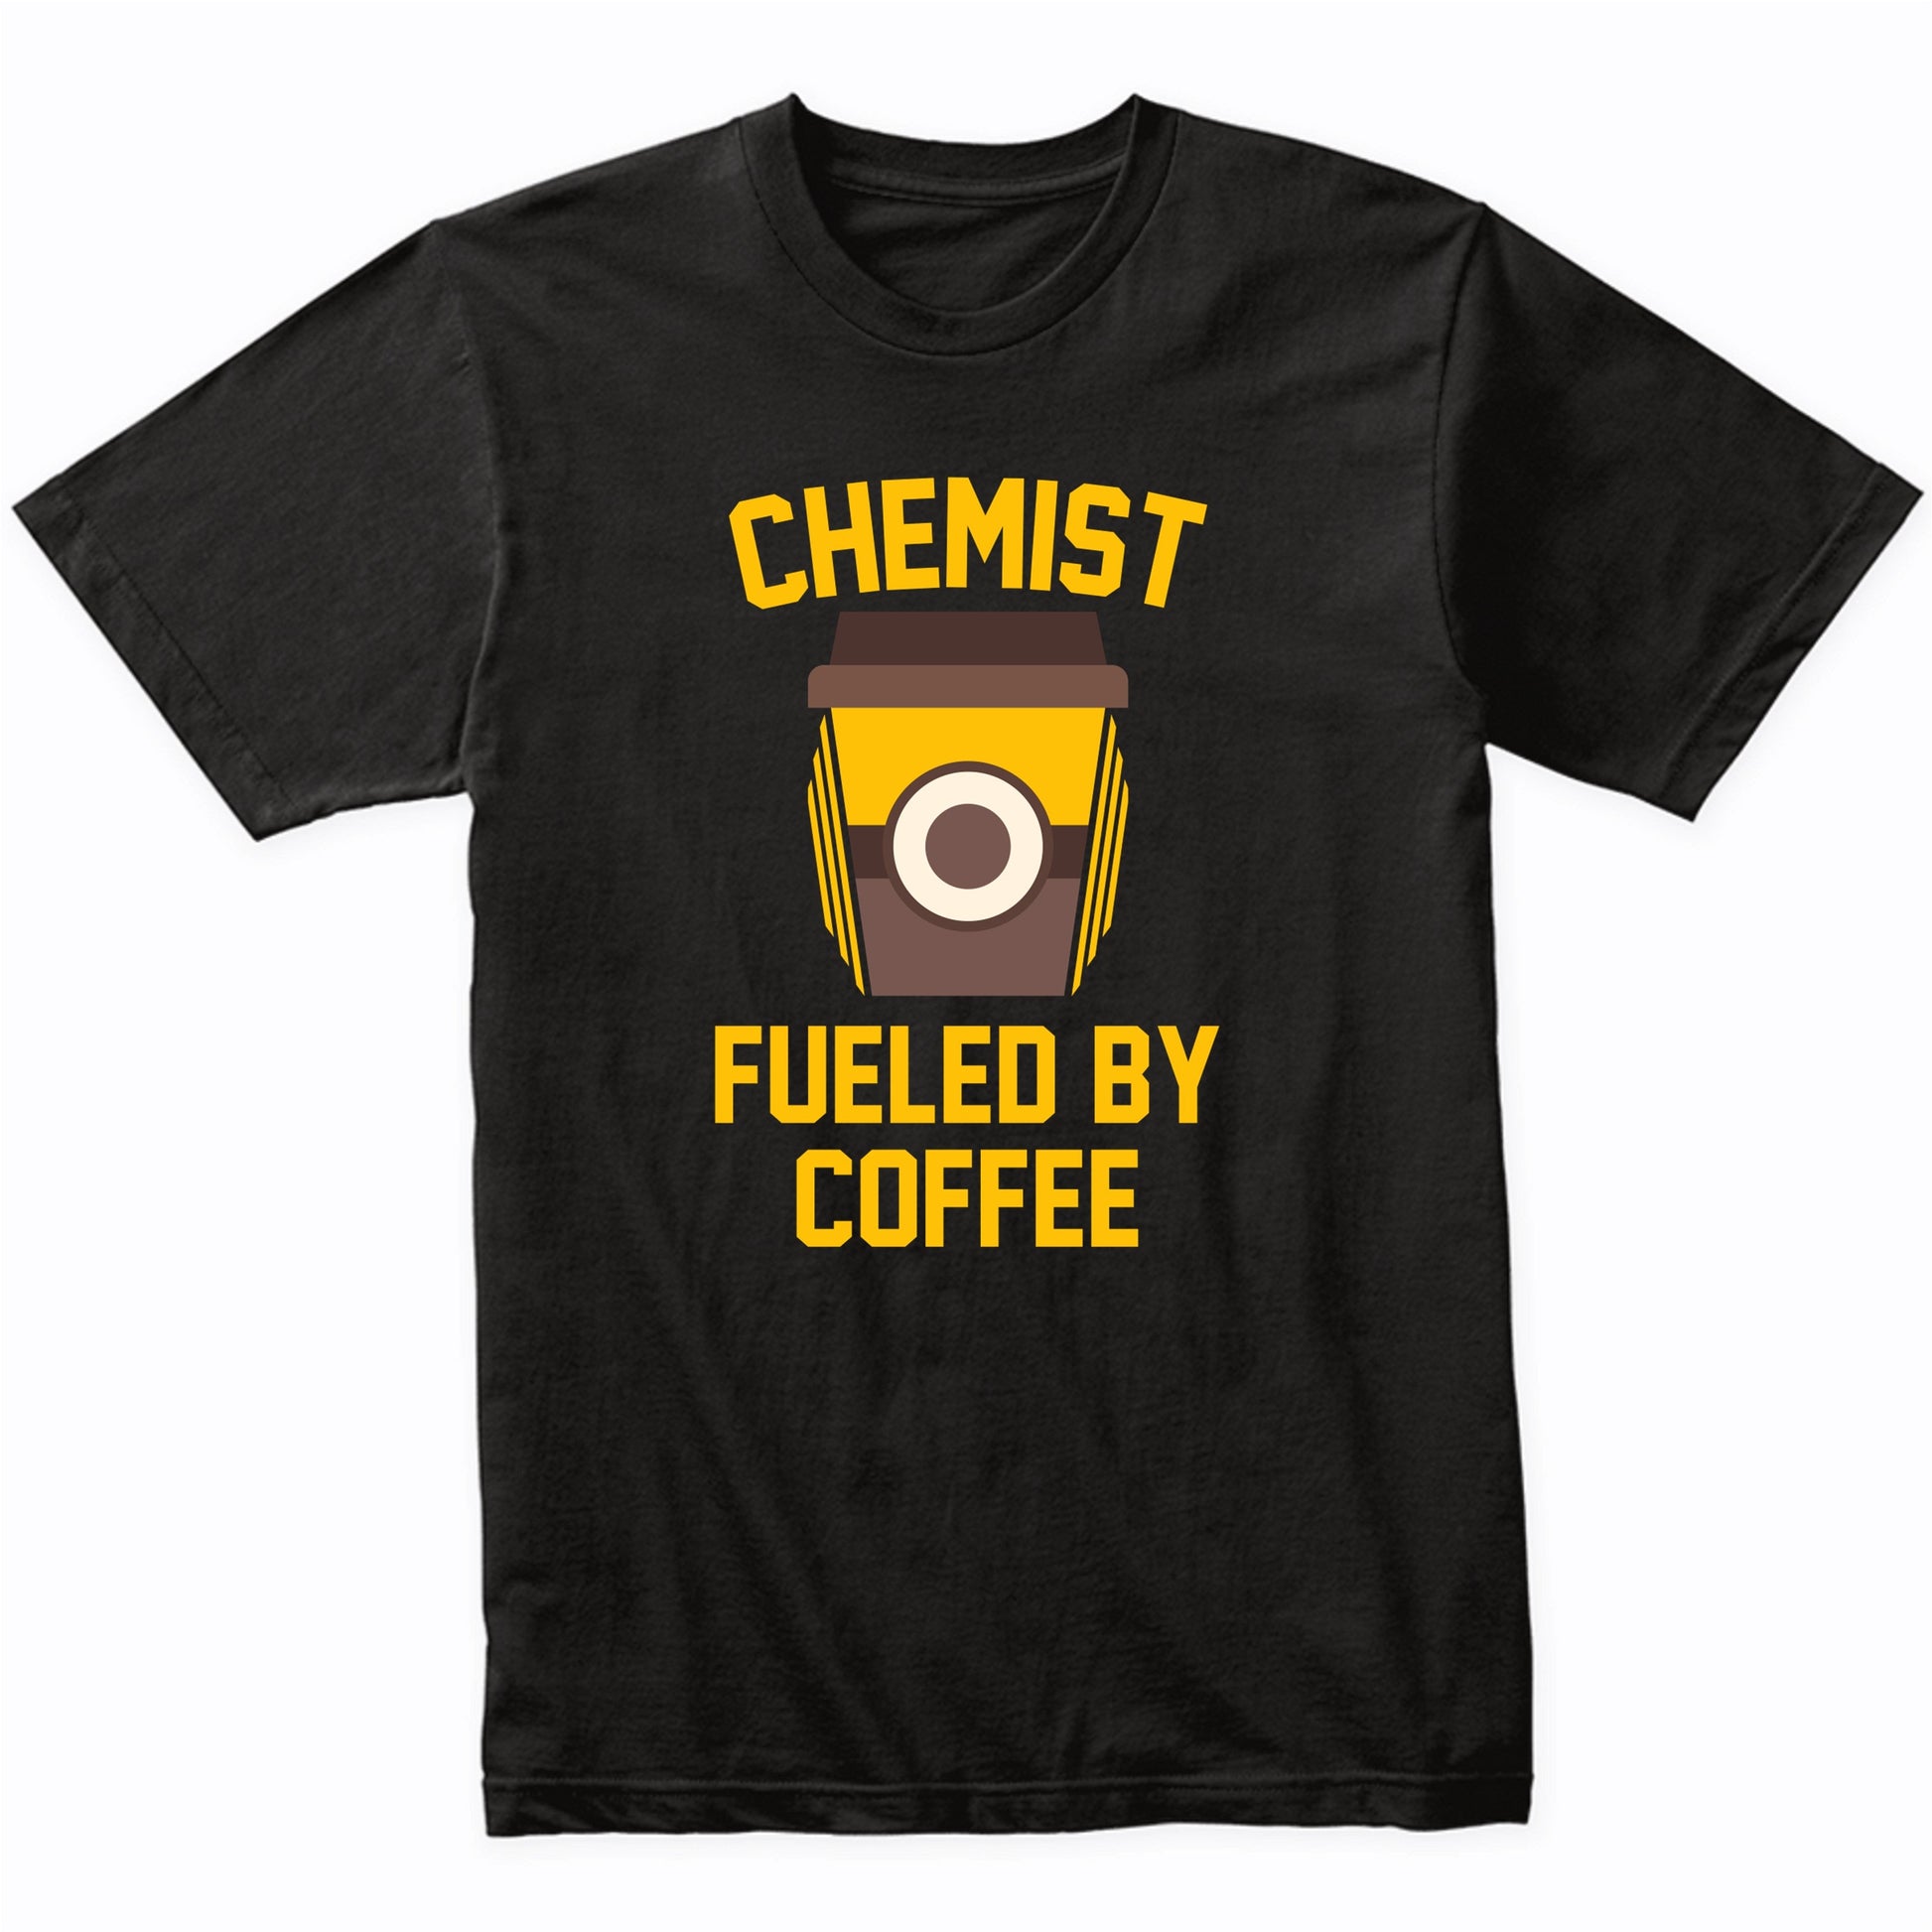 Chemist Fueled By Coffee Funny Chemistry Shirt